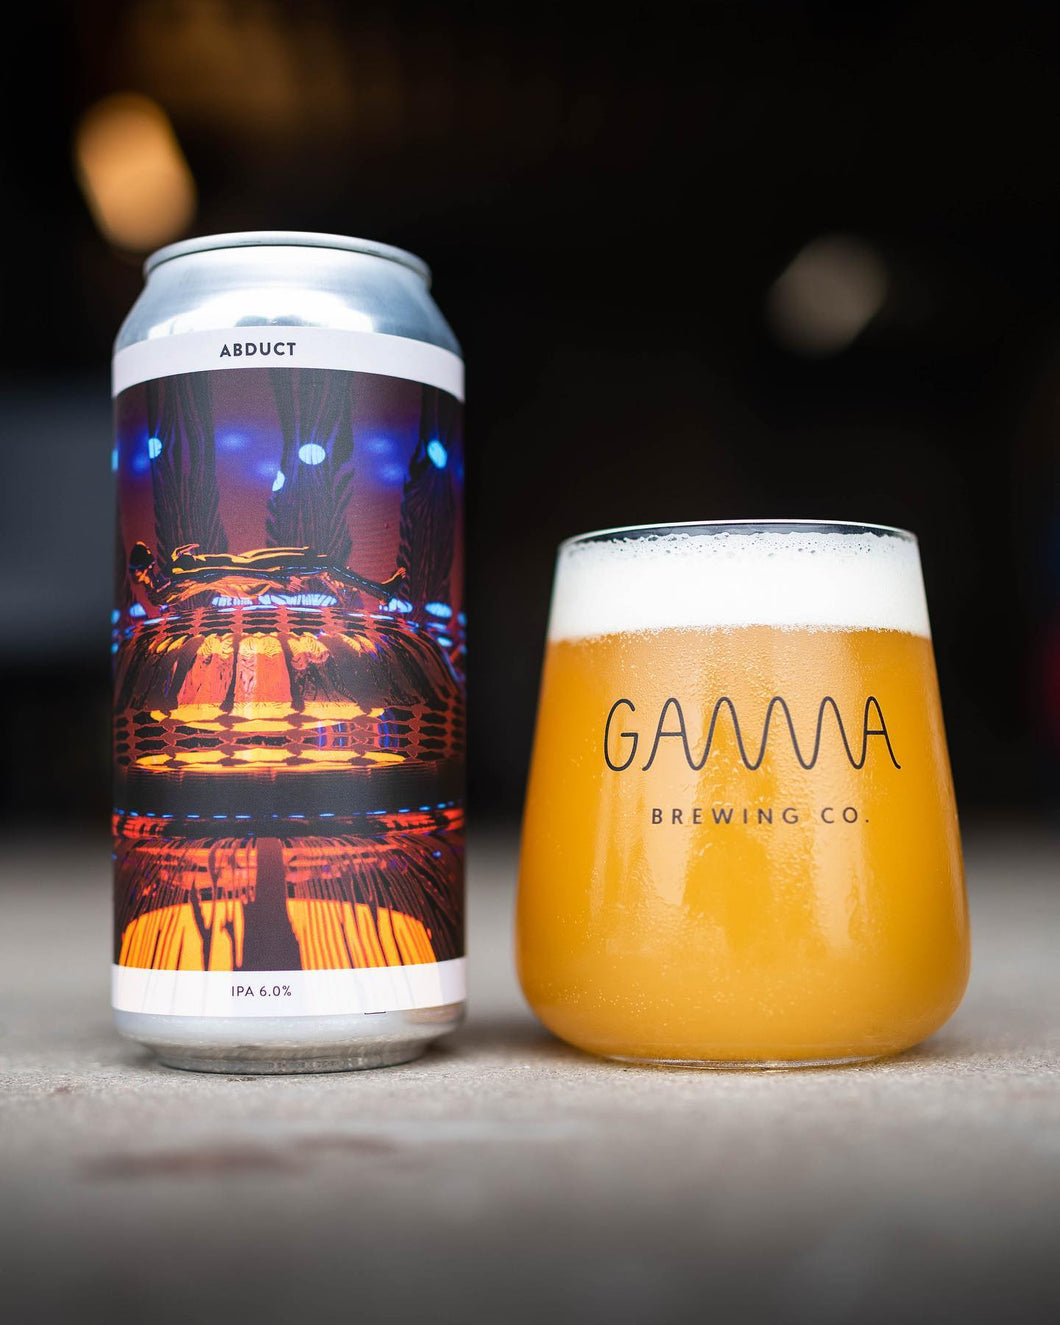 Abduct - Gamma Brewing Co - IPA, 6%, 440ml Can